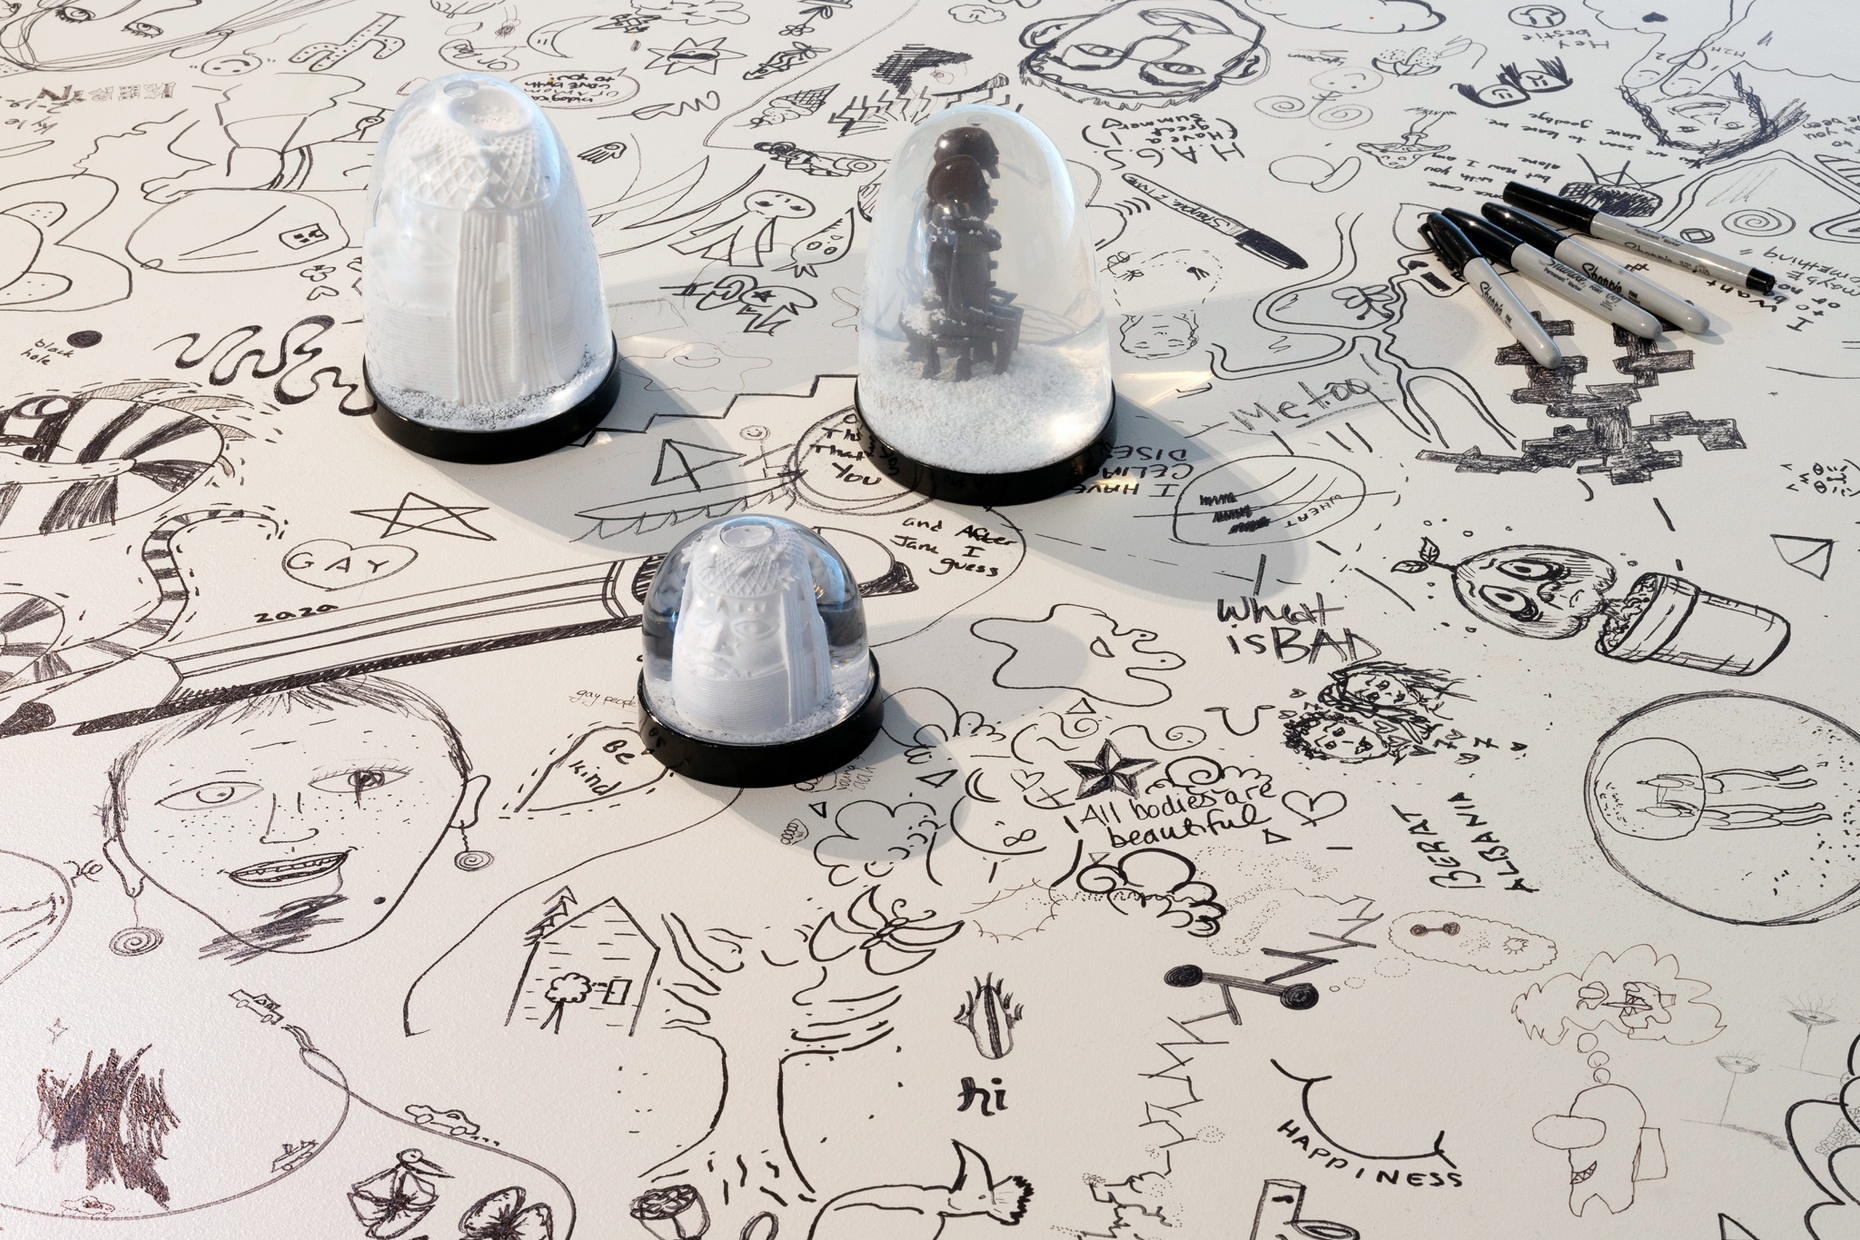 On a white surface are black drawings and doodles, along with various blurbs of handwritten text, atop which sits three black and white snow globes and four sharpies.